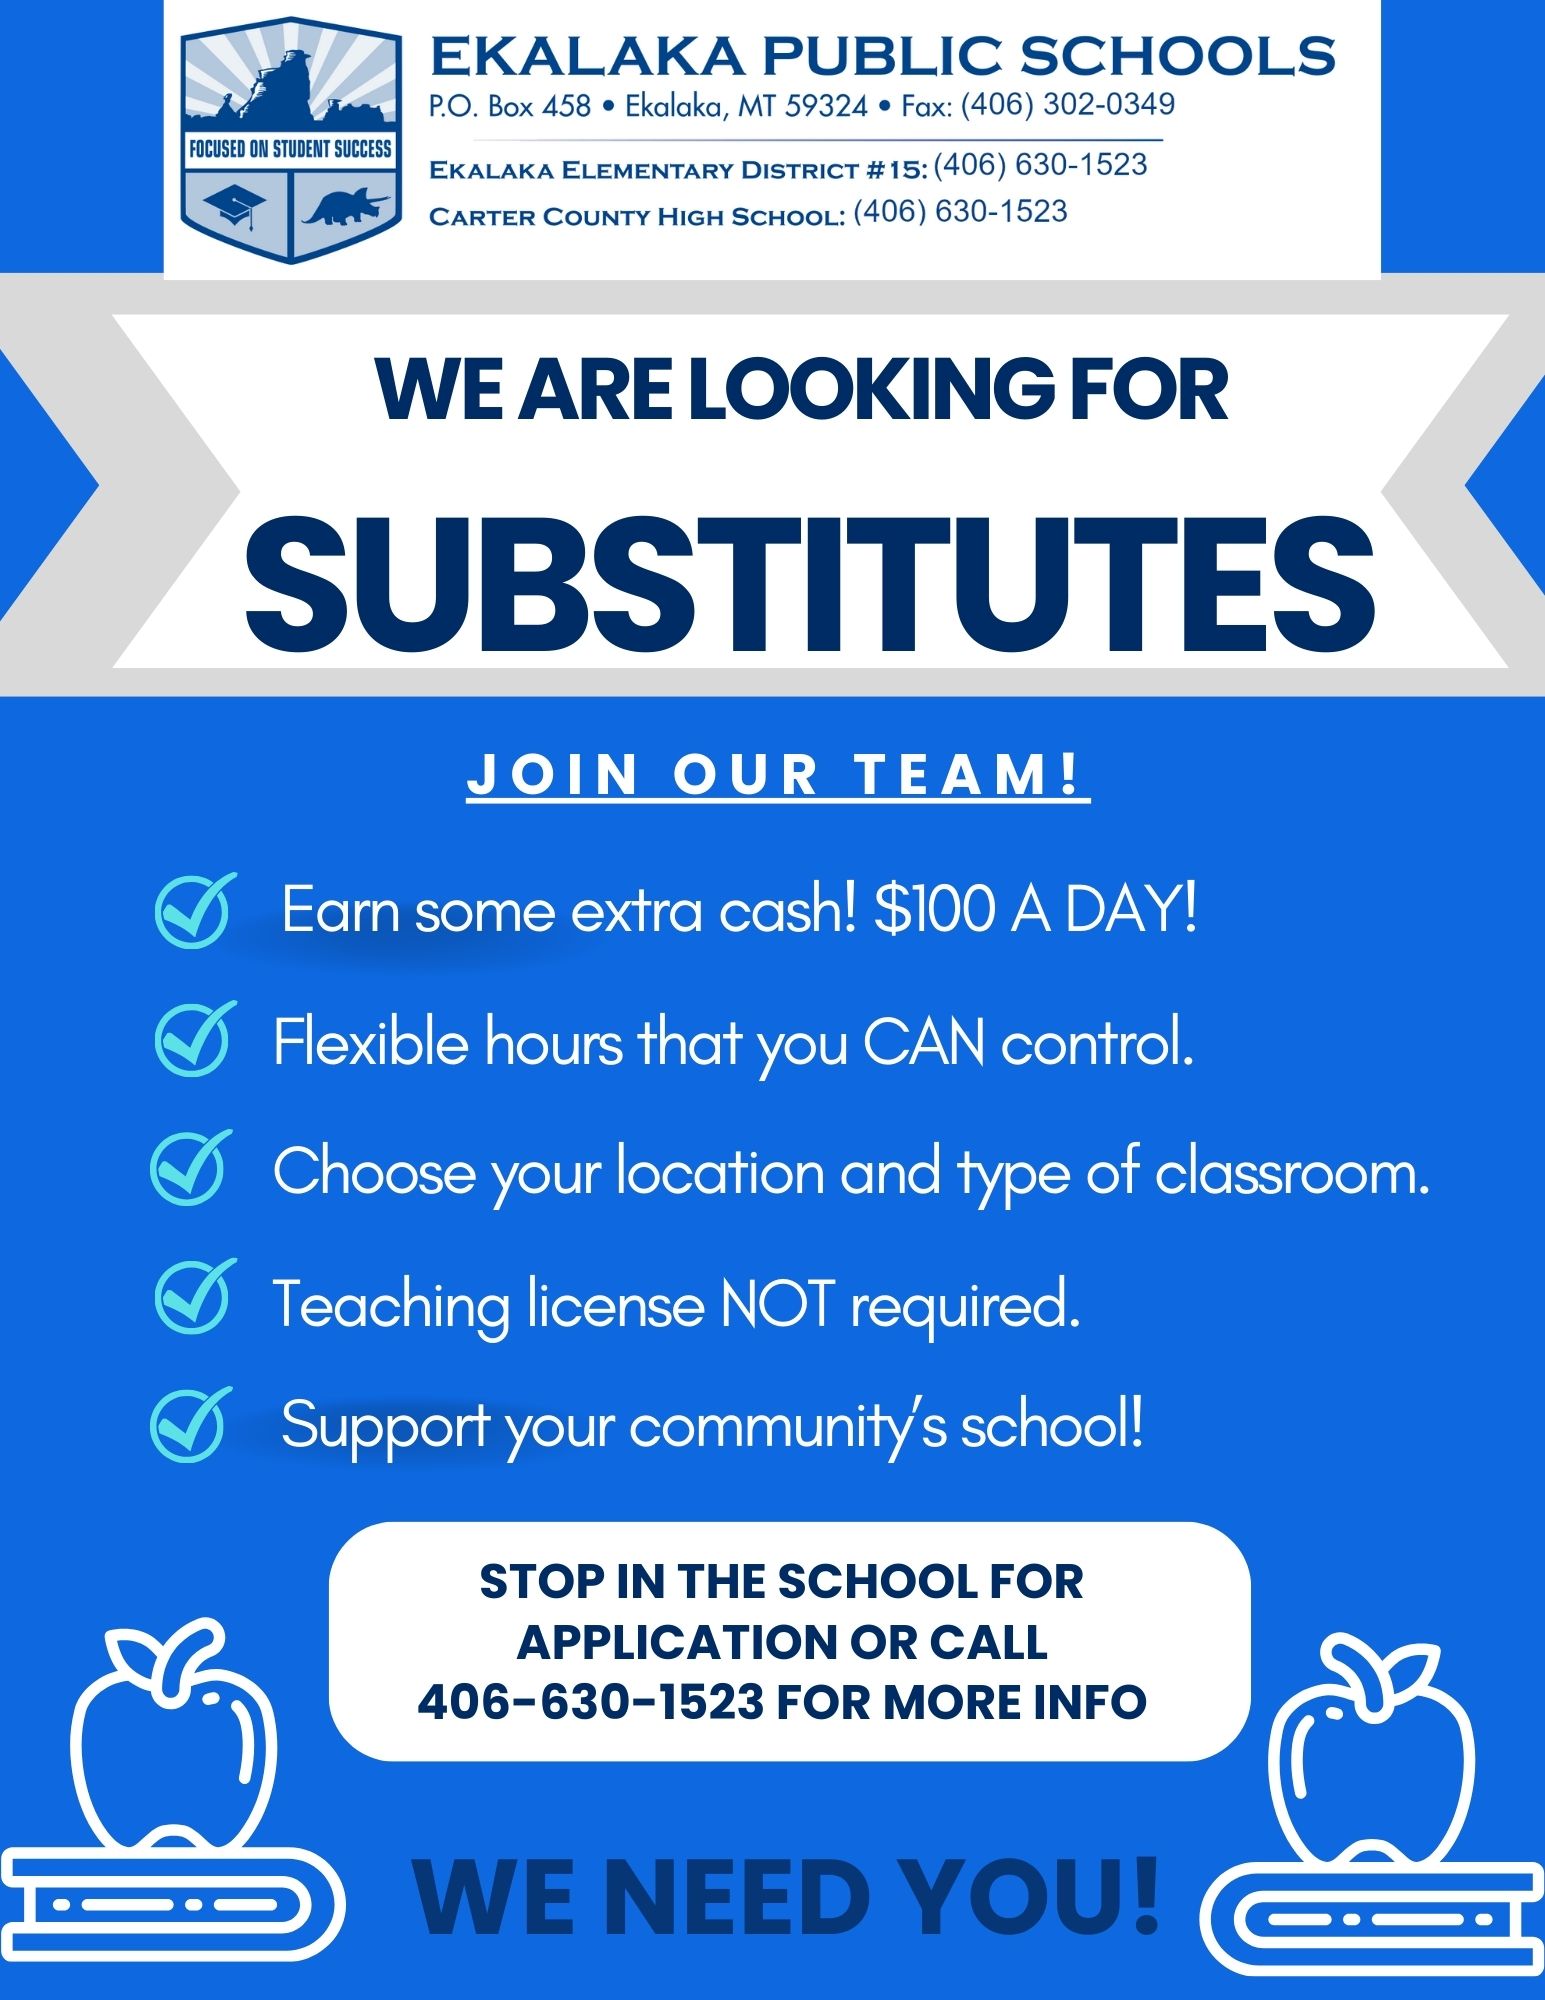 We are looking for substitutes, stop by the school or call 6301523 for more info!